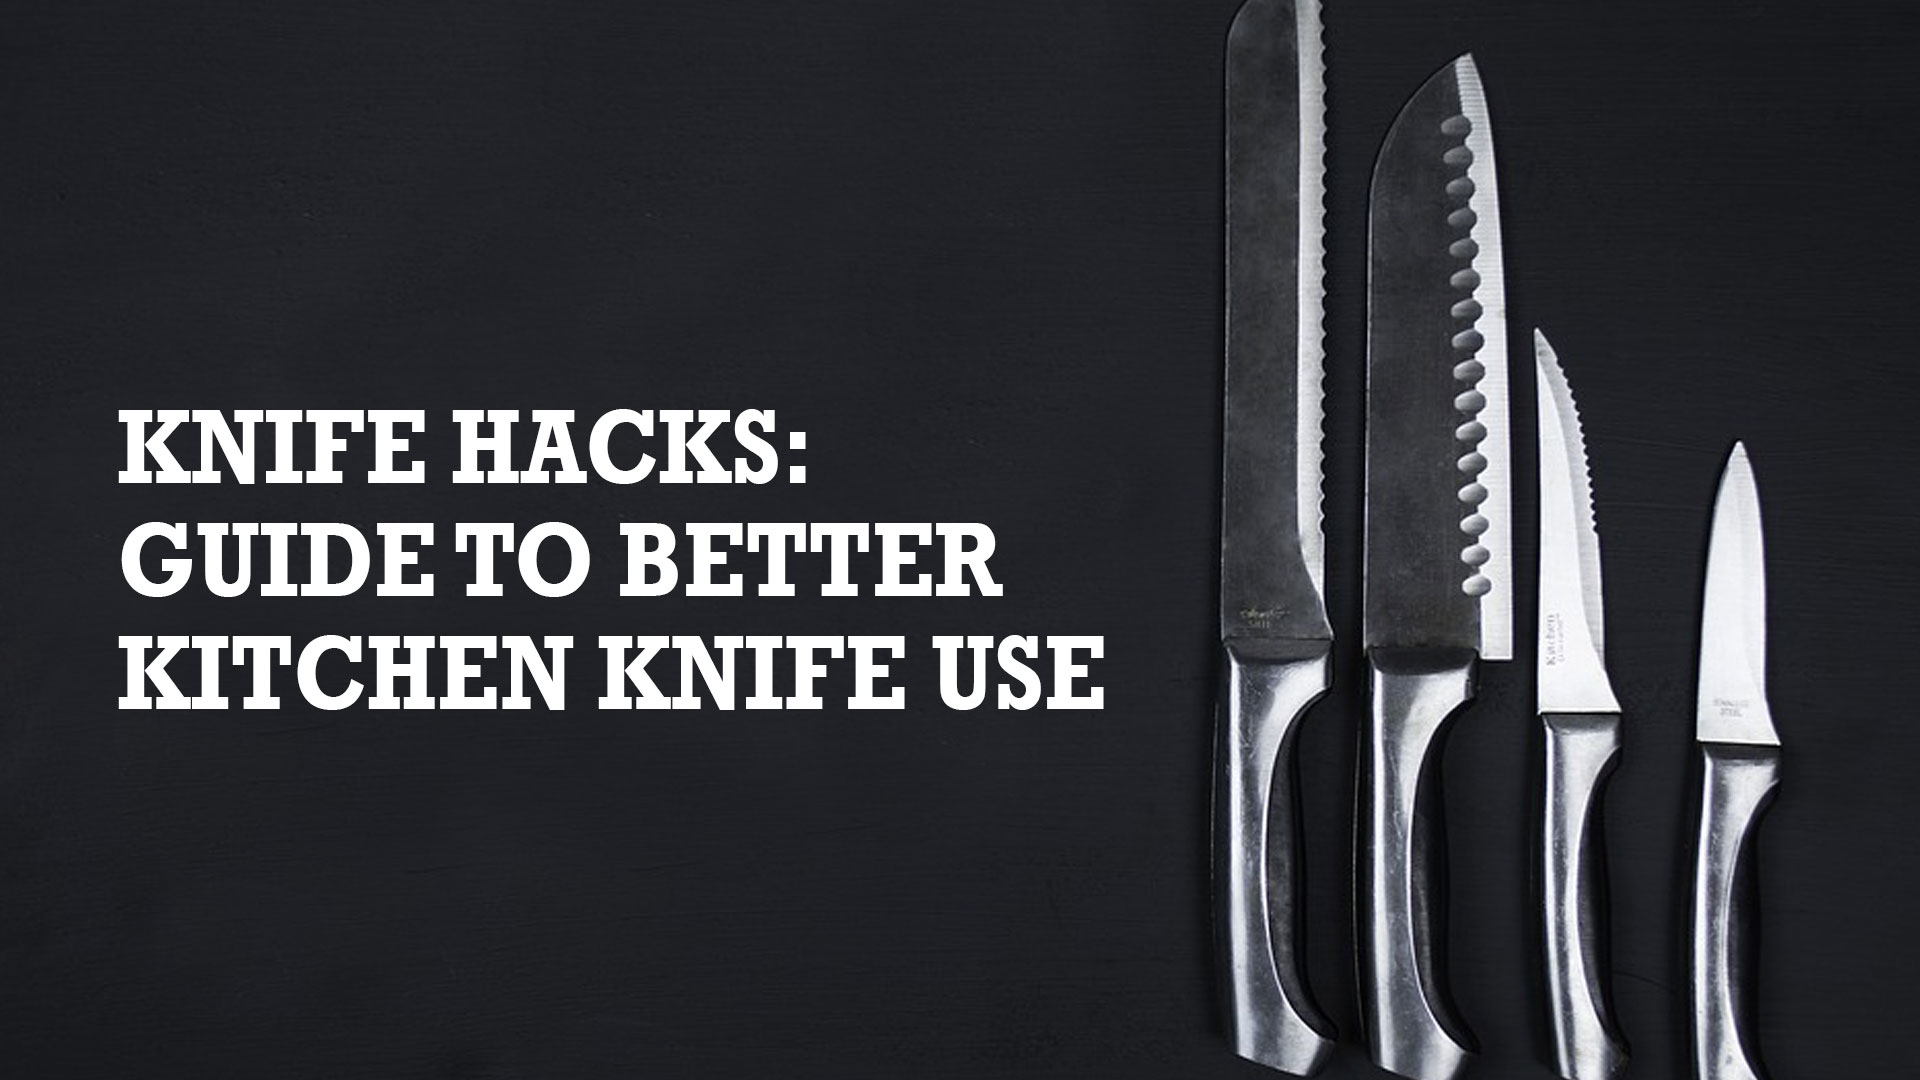 Knife Hacks: Guide to Better Kitchen Knife Use